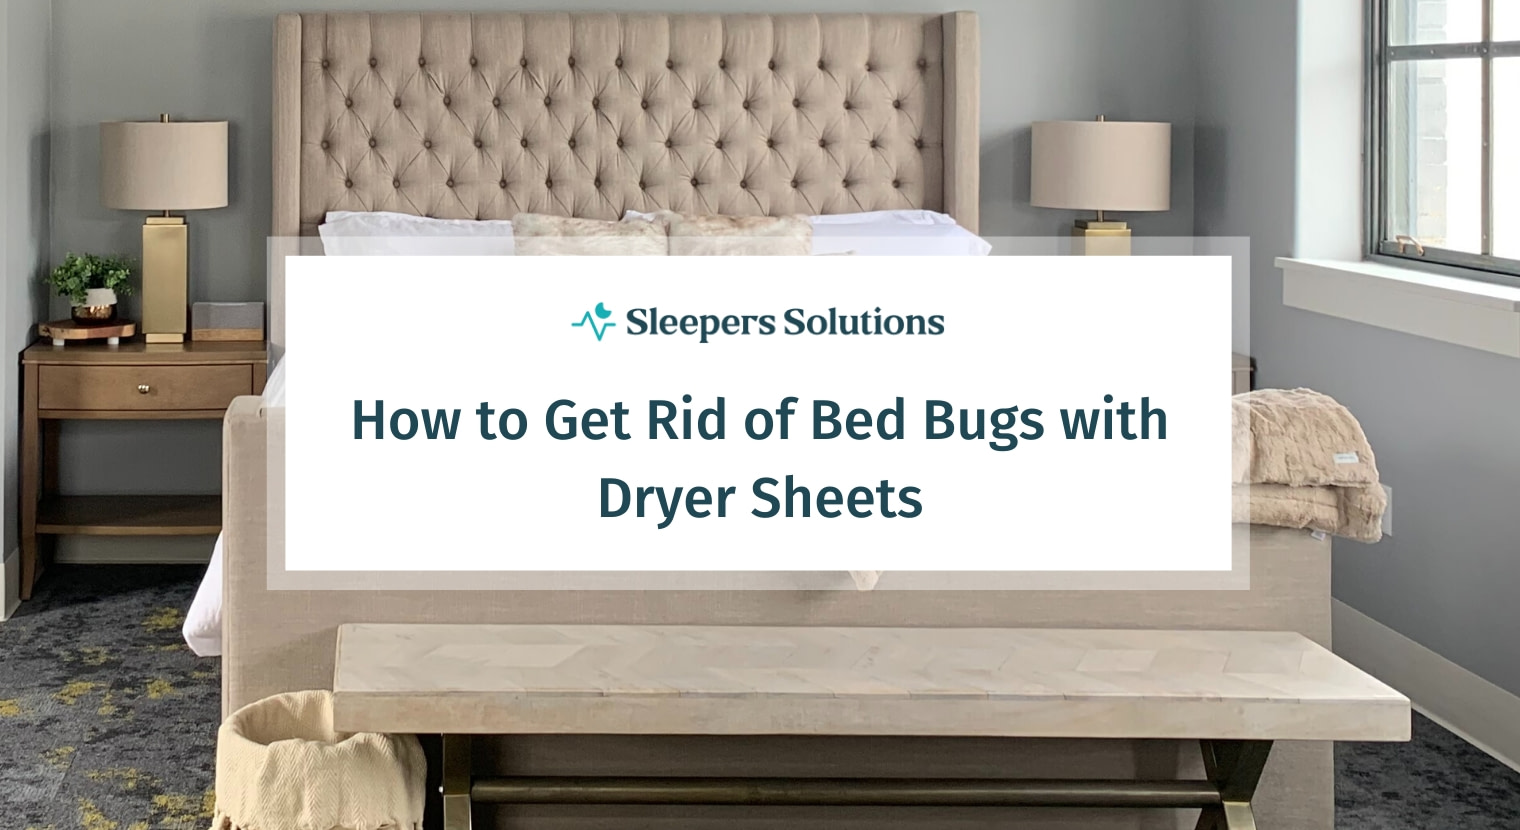 How To Get Rid of Bed Bugs With Dryer Sheets